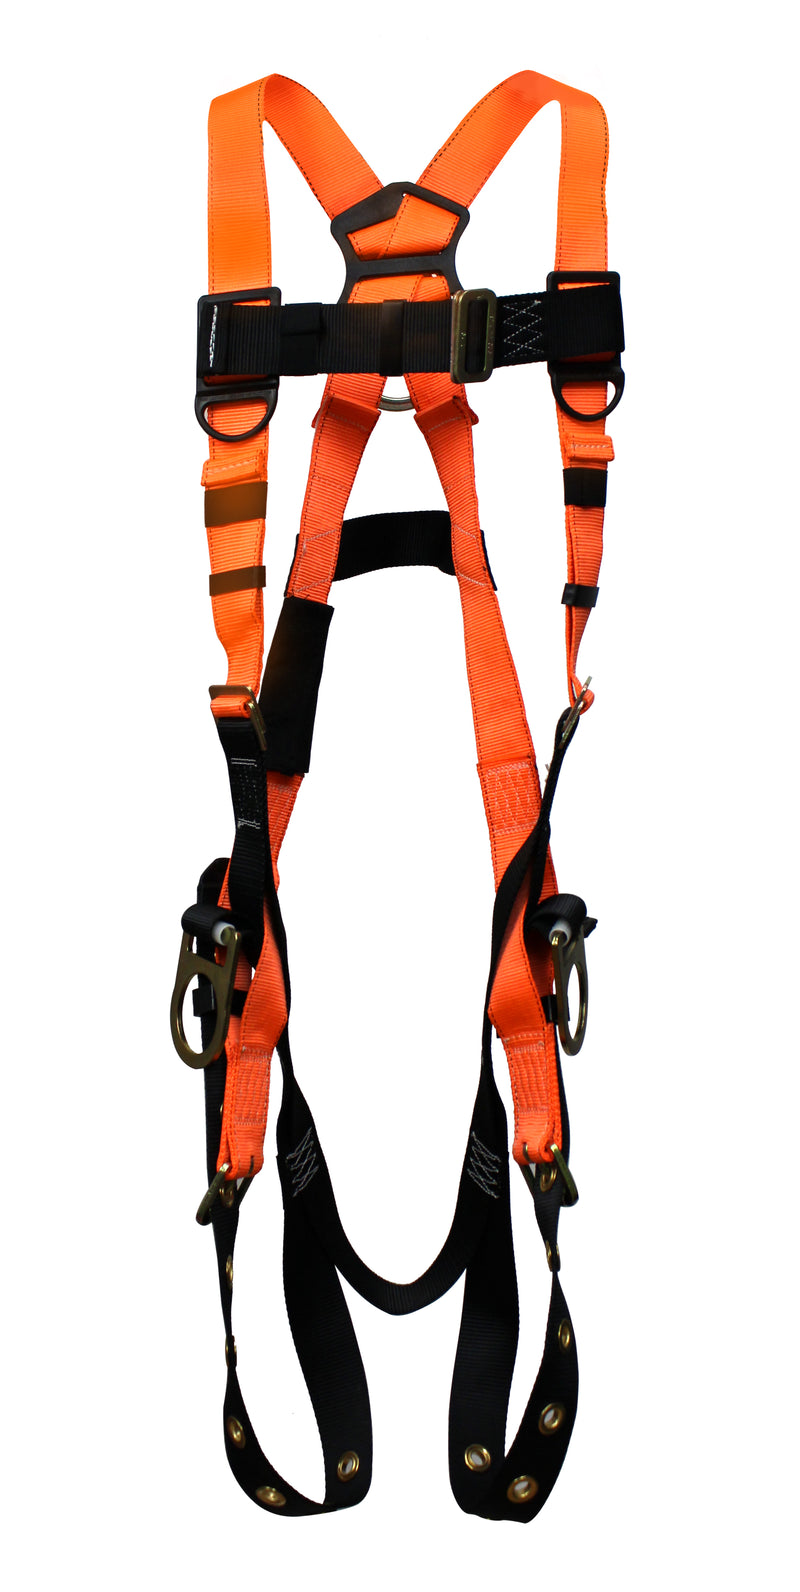 Spidergard SPH002 Three D-Ring Full Body Fall Protection Safety Harness (Yellow, L-XL) (1 Pack, Orange)-RK Safety-RK Safety